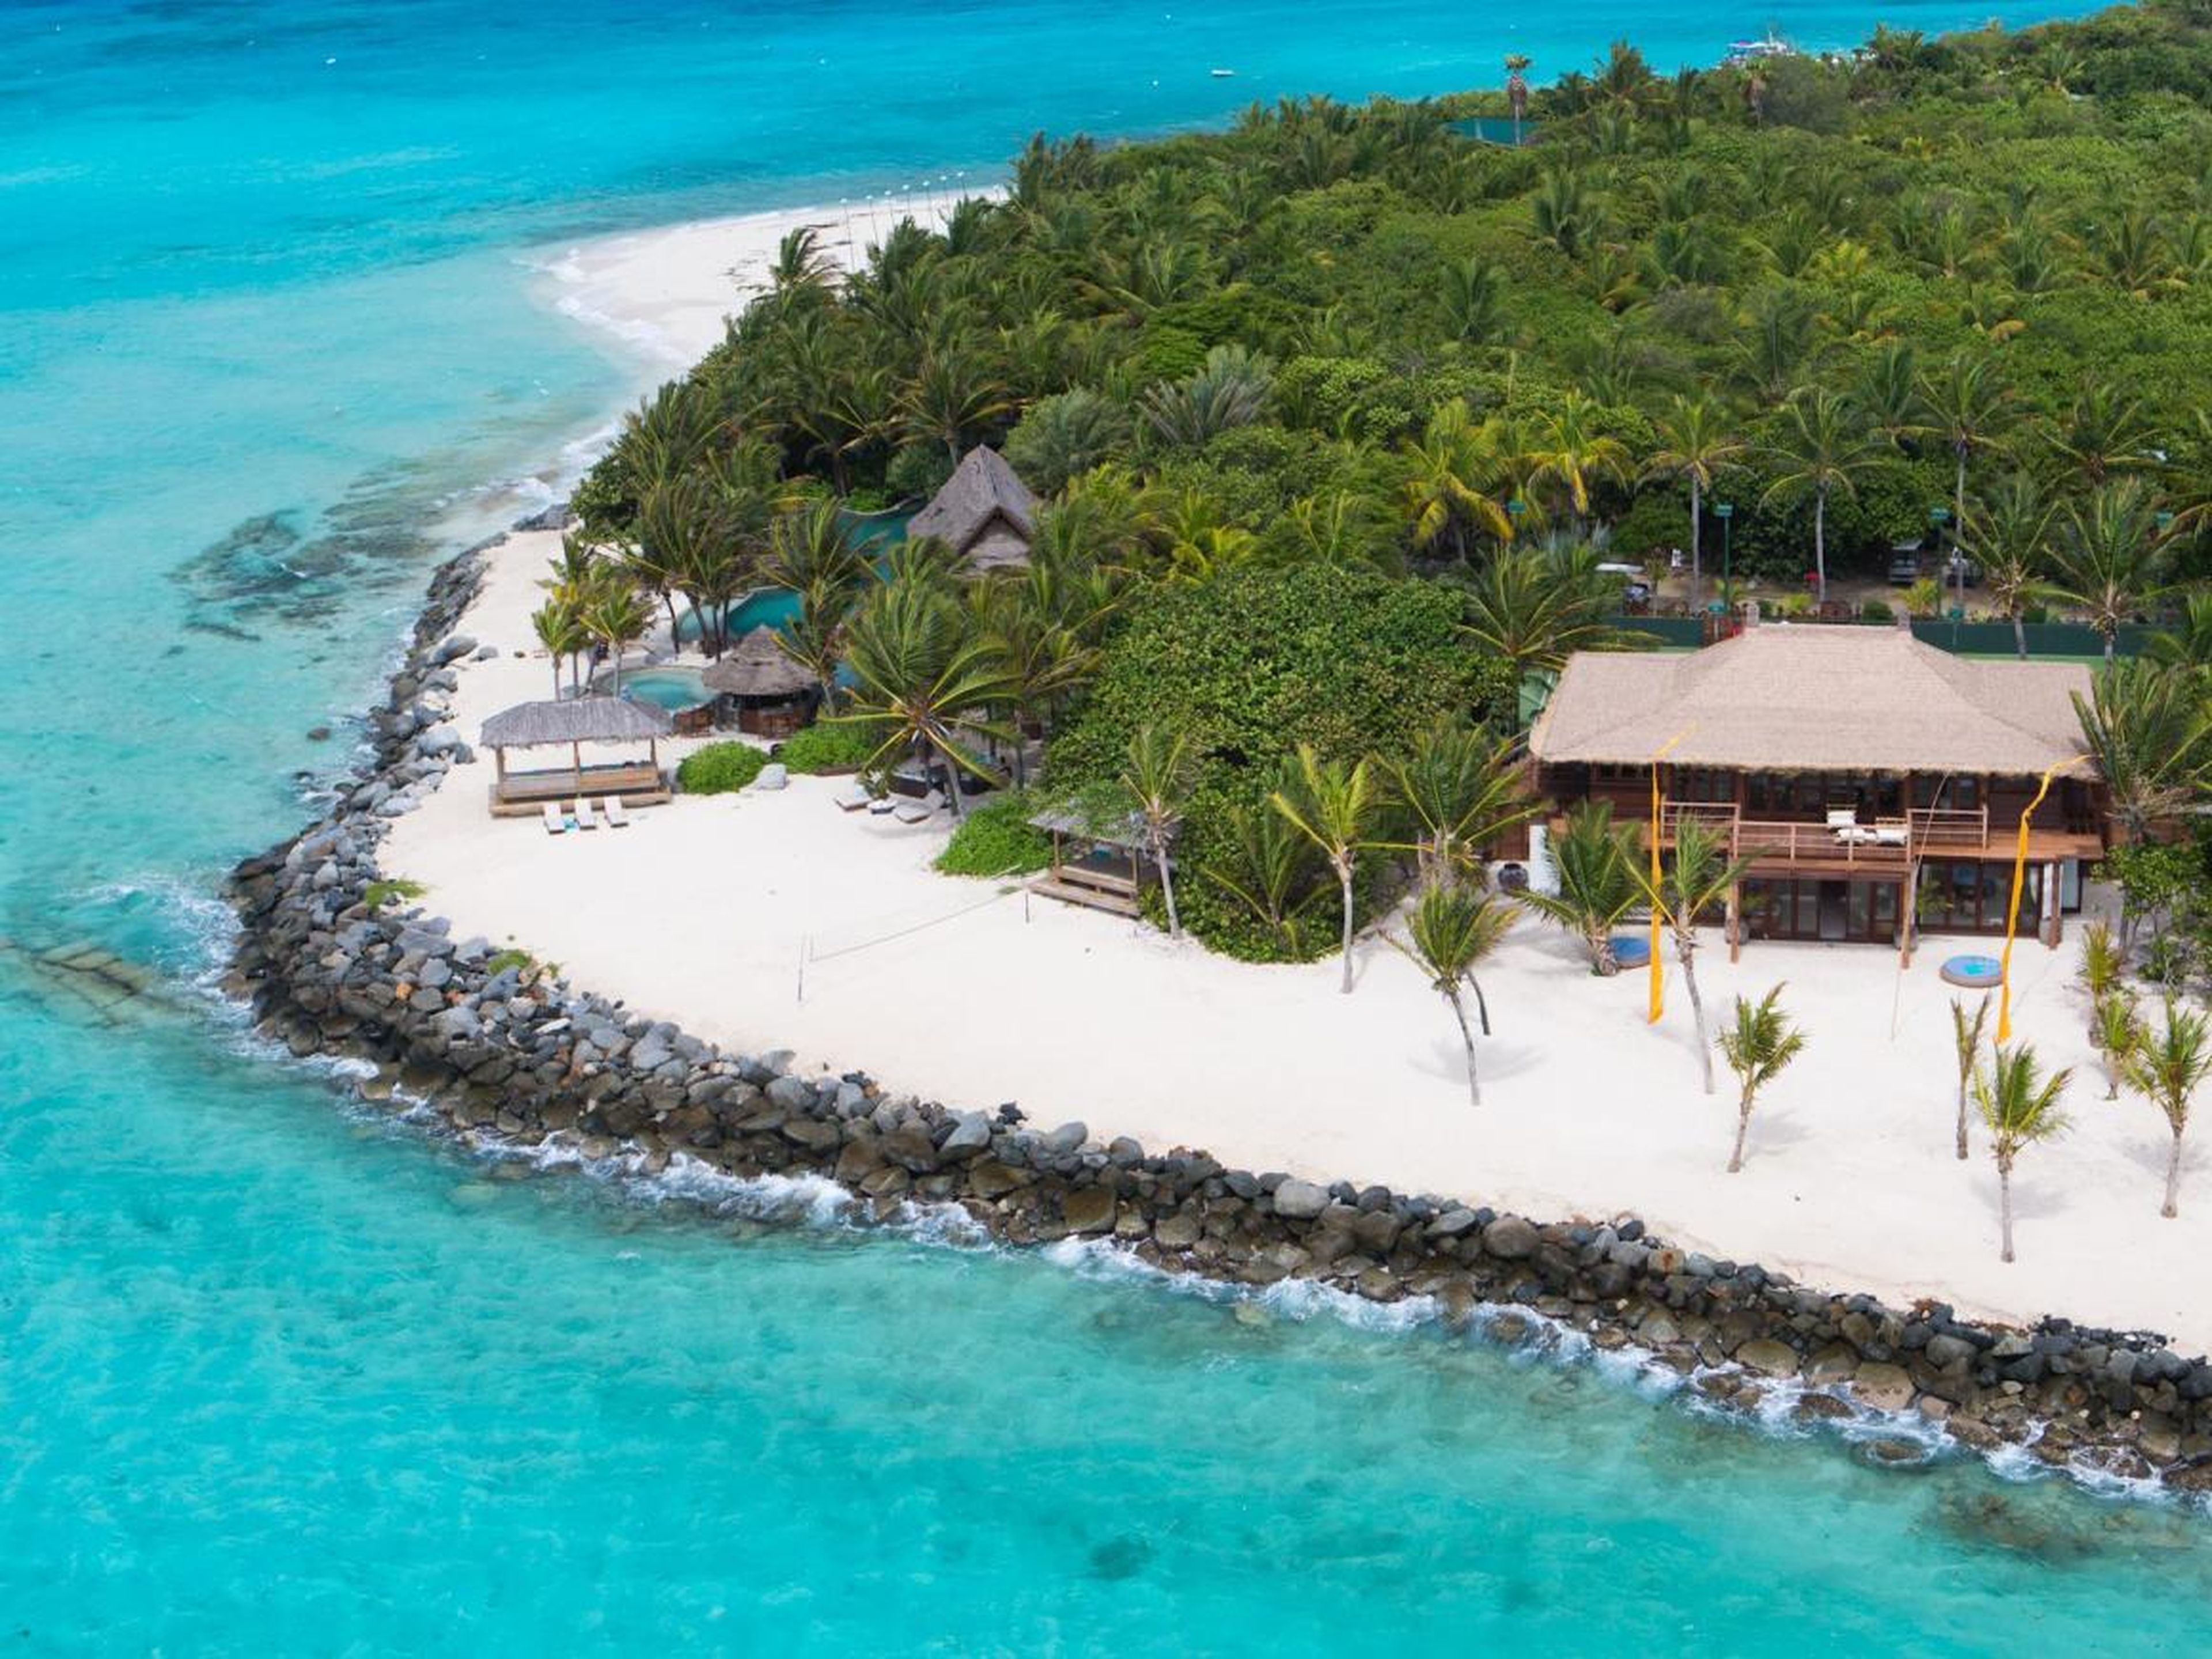 Sir Richard Branson bought Necker Island in the British Virgin Islands for about $320,000 dollars in 1979.